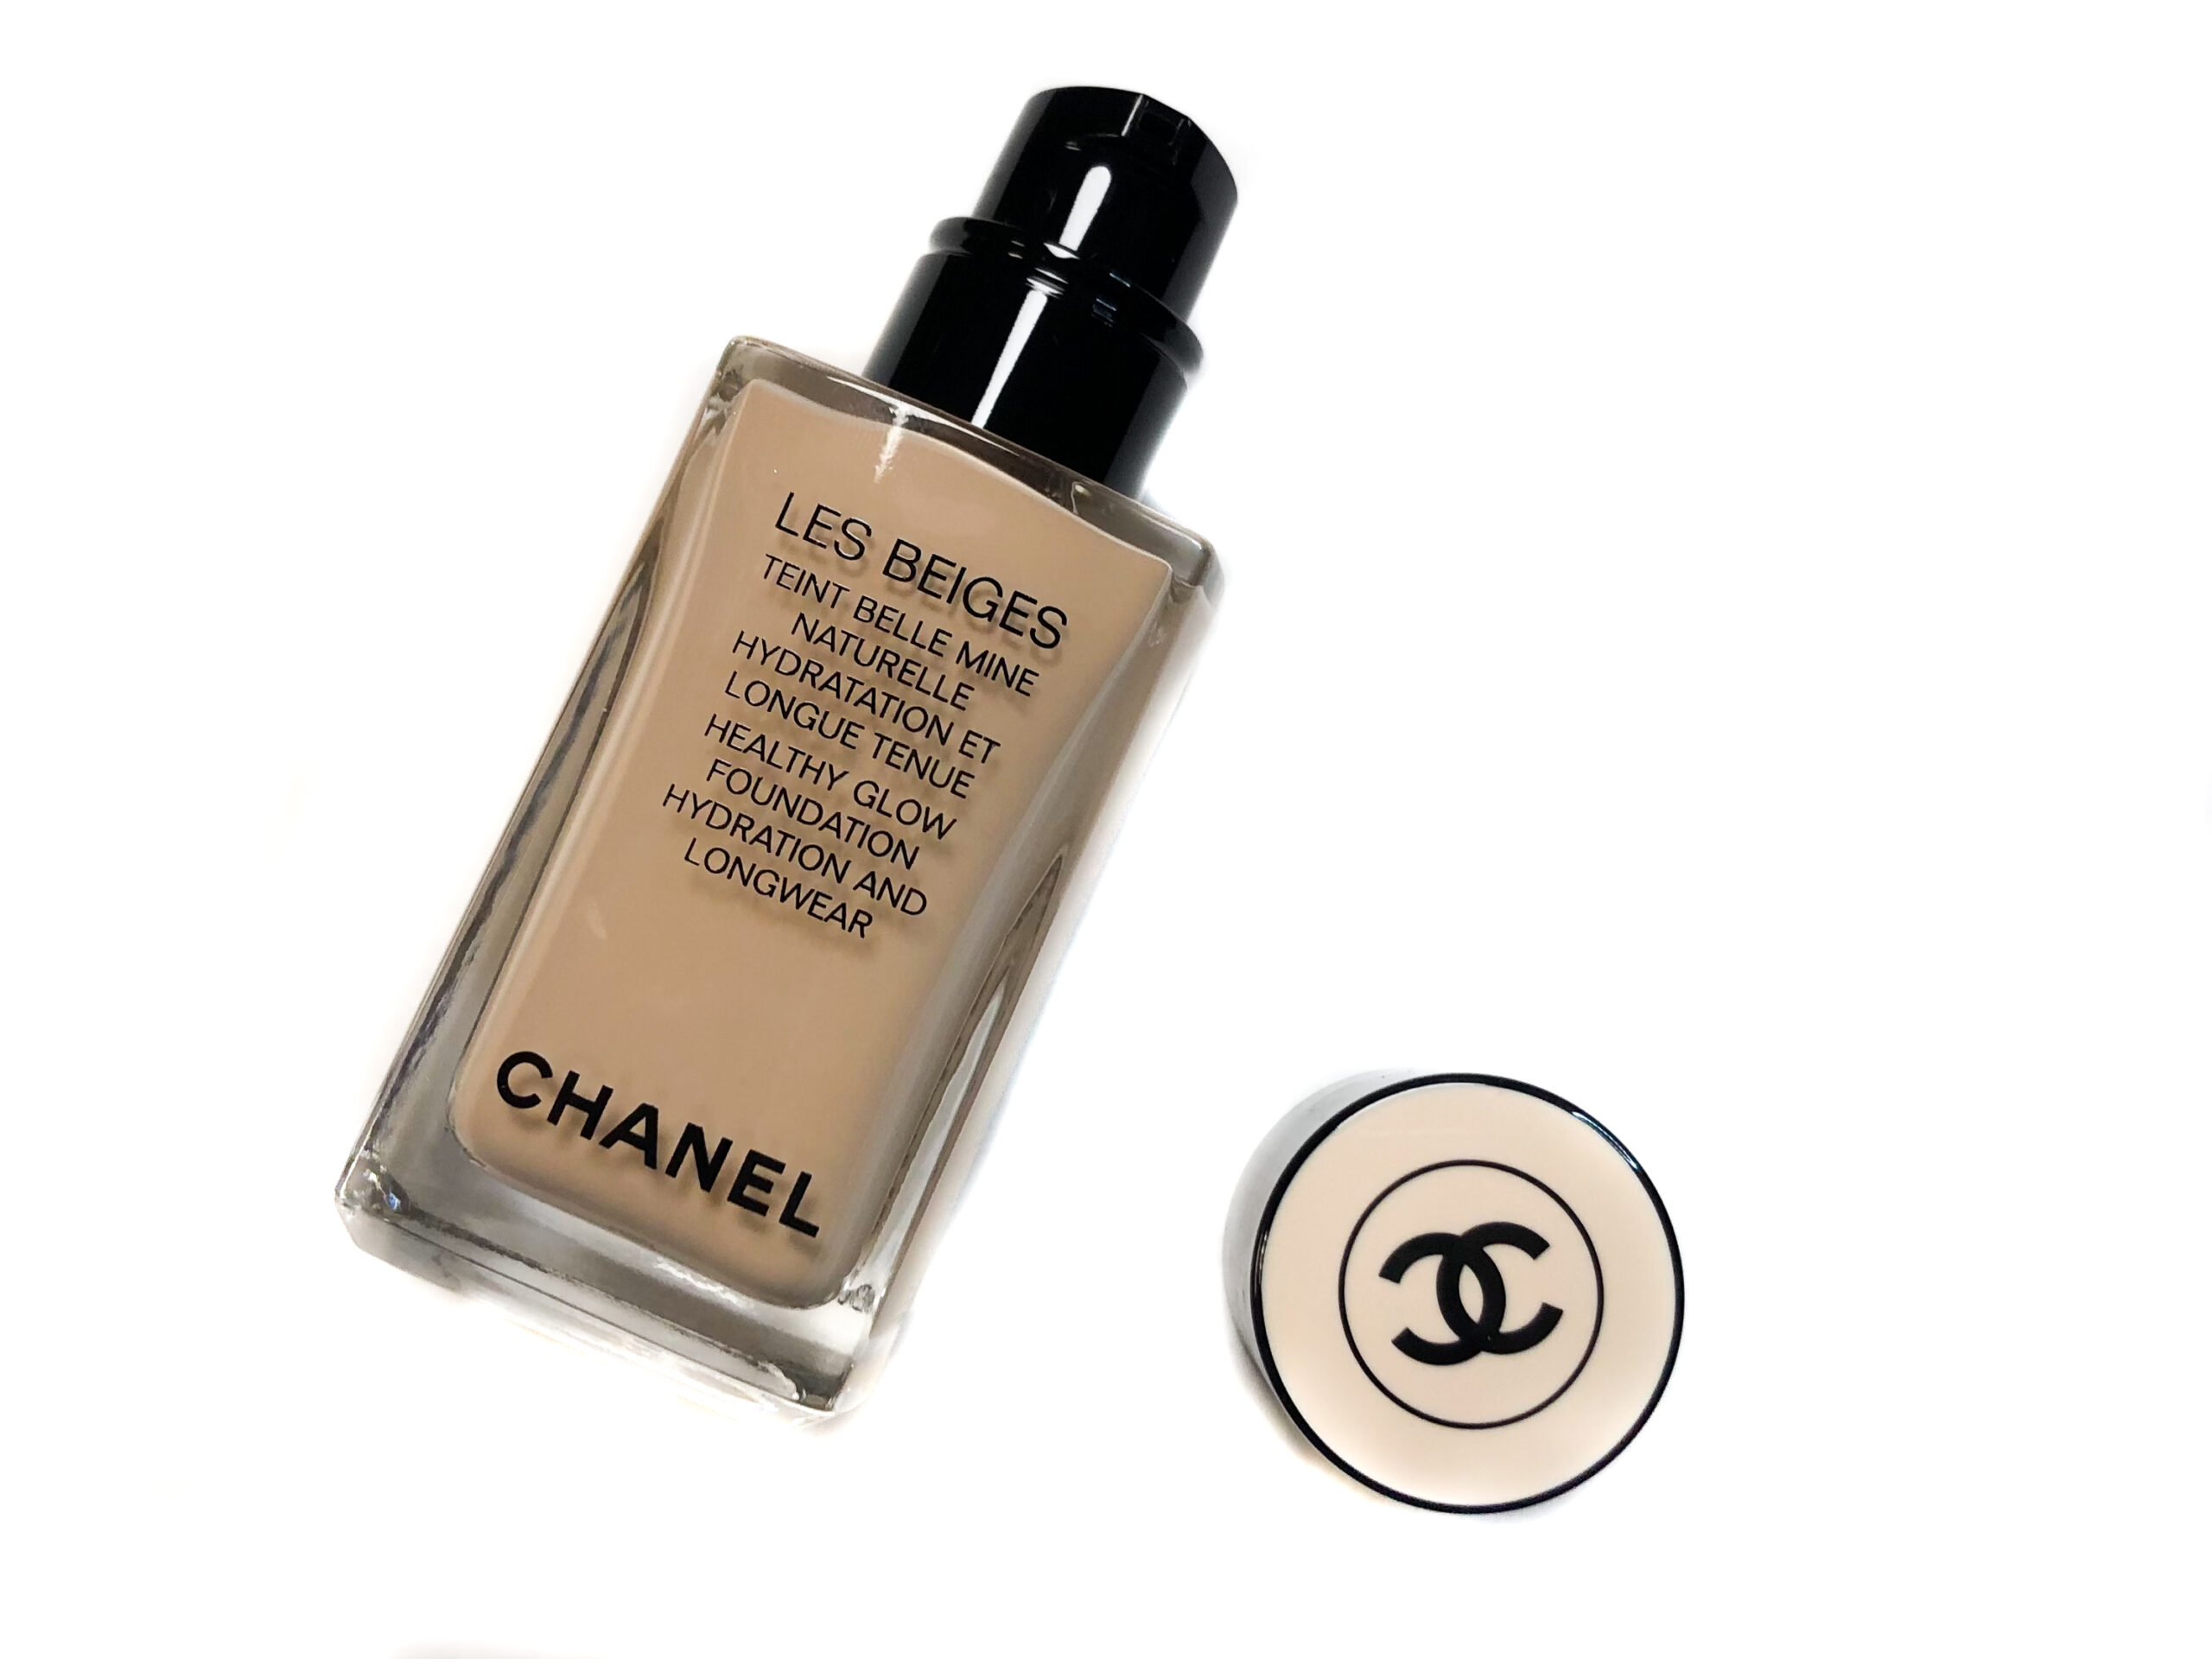 Chanel Les Beiges Healthy Glow Foundation Hydration and Longer in the Shade  B20 $60